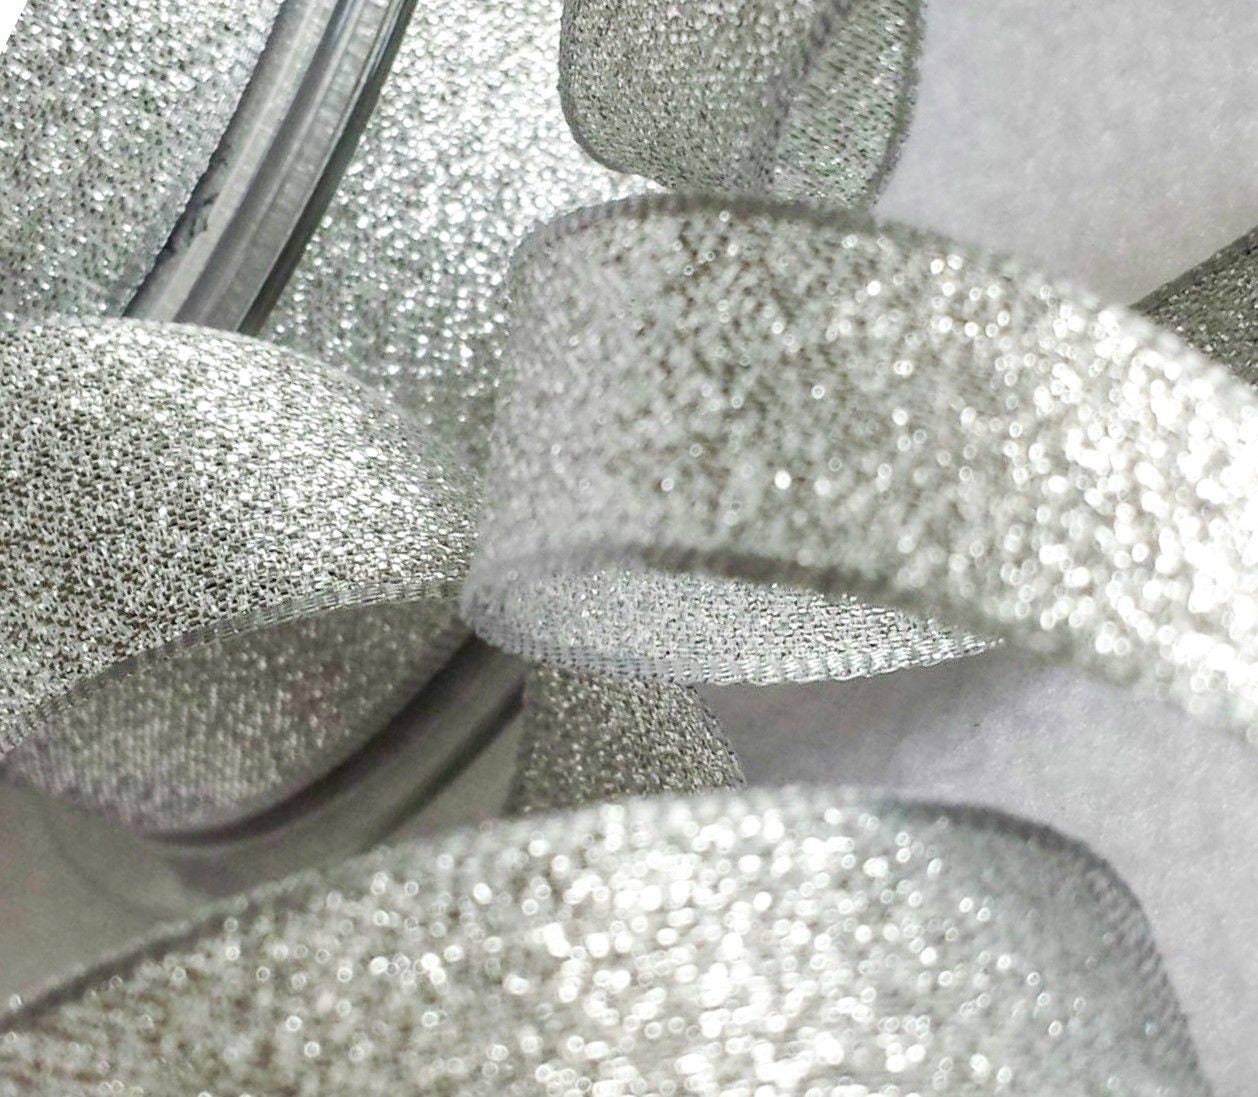 Silver Glitter Ribbon 1 Inch x 25 Yards, Sparkly Metallic Fabric Ribbons,  Sparkly Silver Ribbon for Gift Wrapping, DIY Crafts, Floral Bouquets